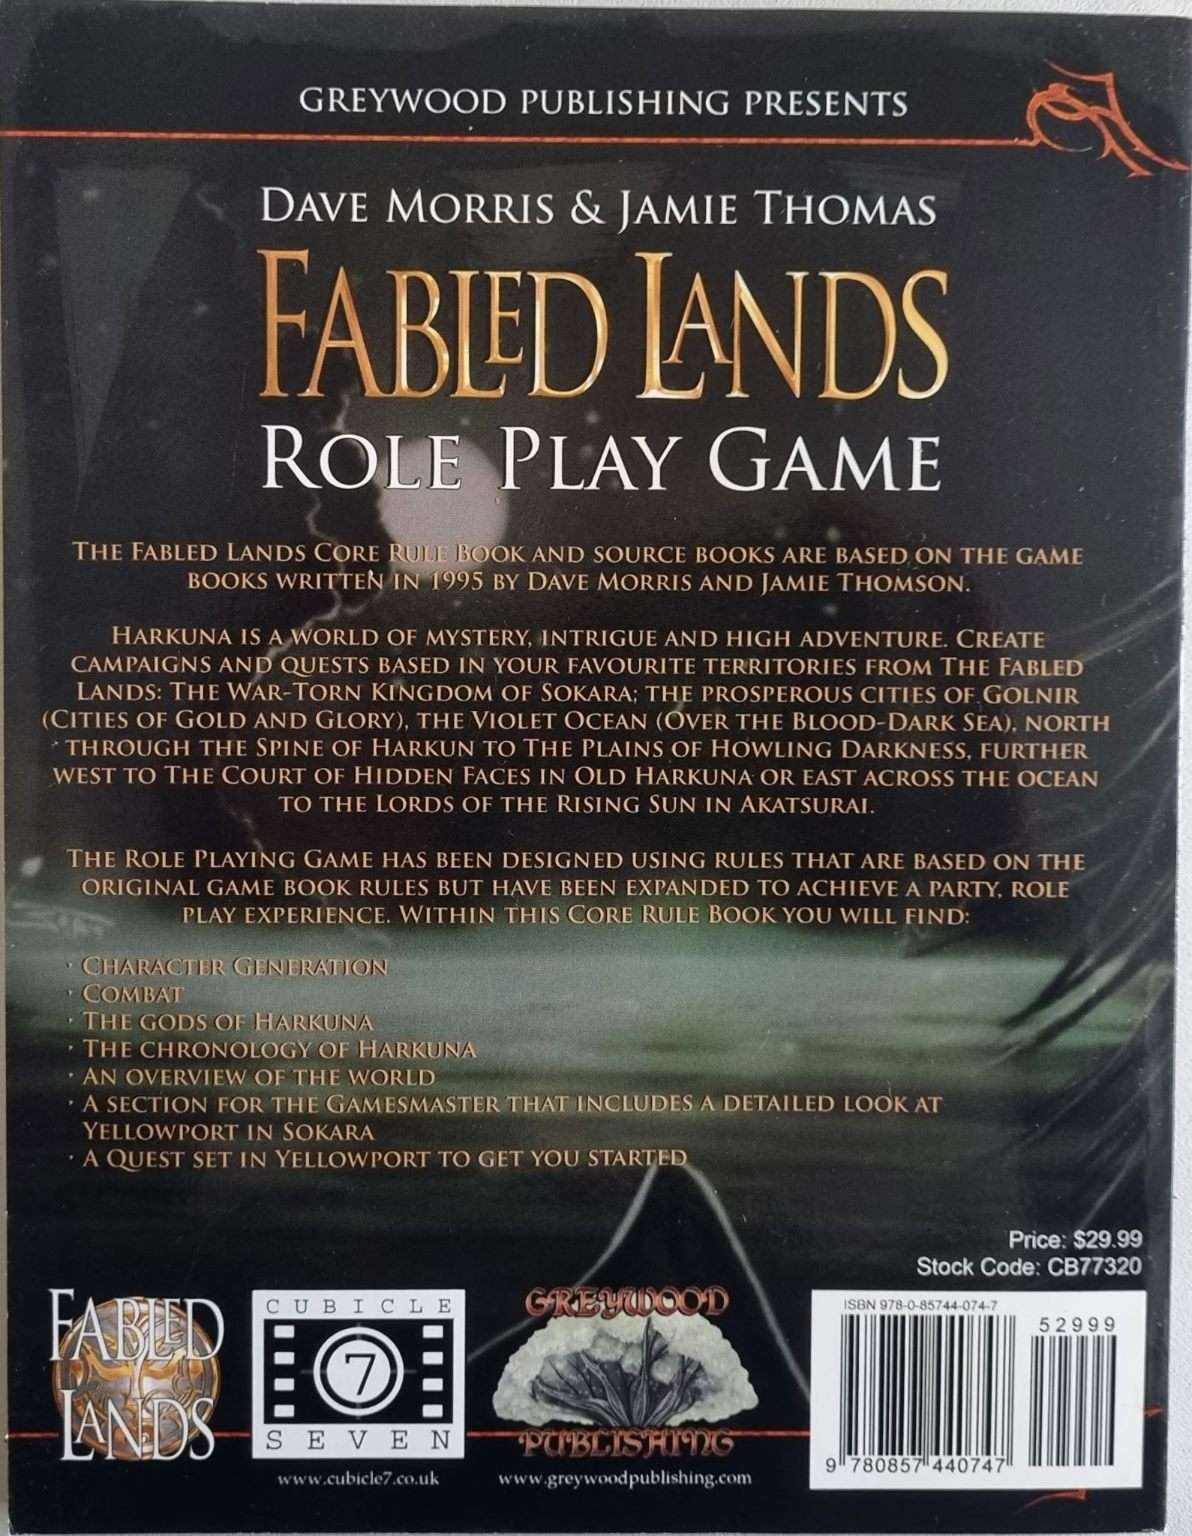 Fabled Lands Role Playing Game - Dave Morris & Jamie Thomson